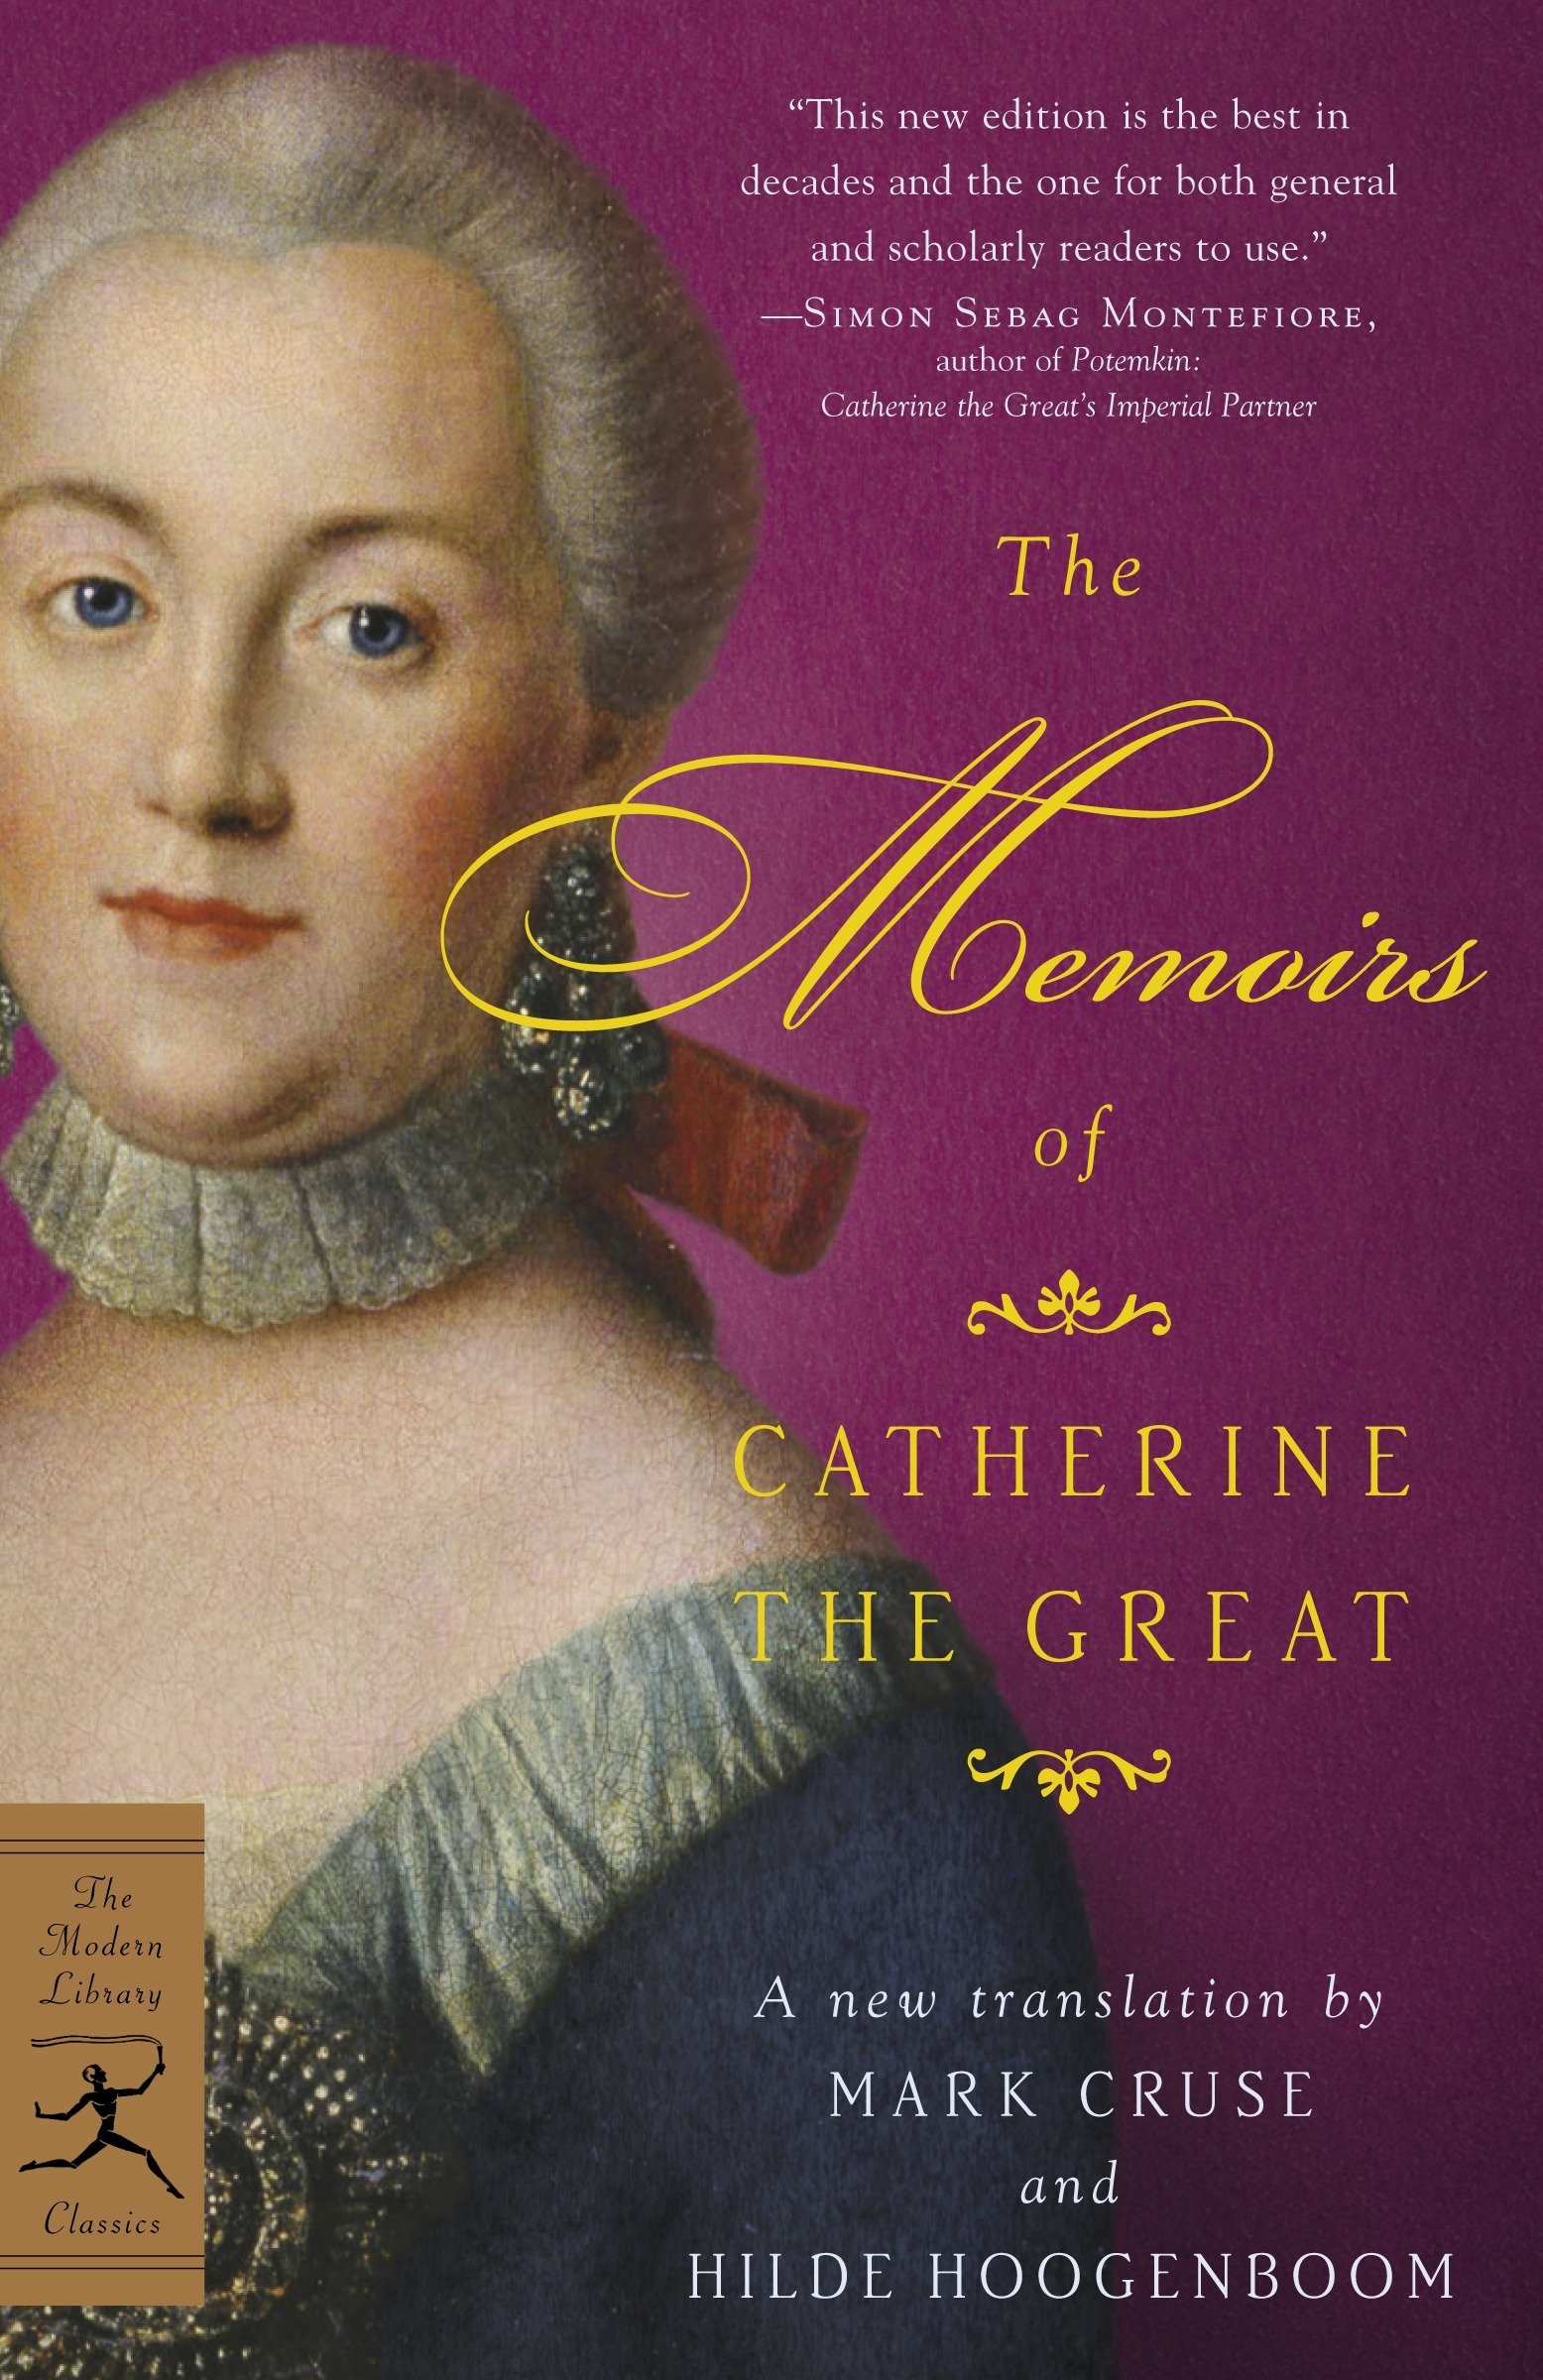 Catherine the Great book cover